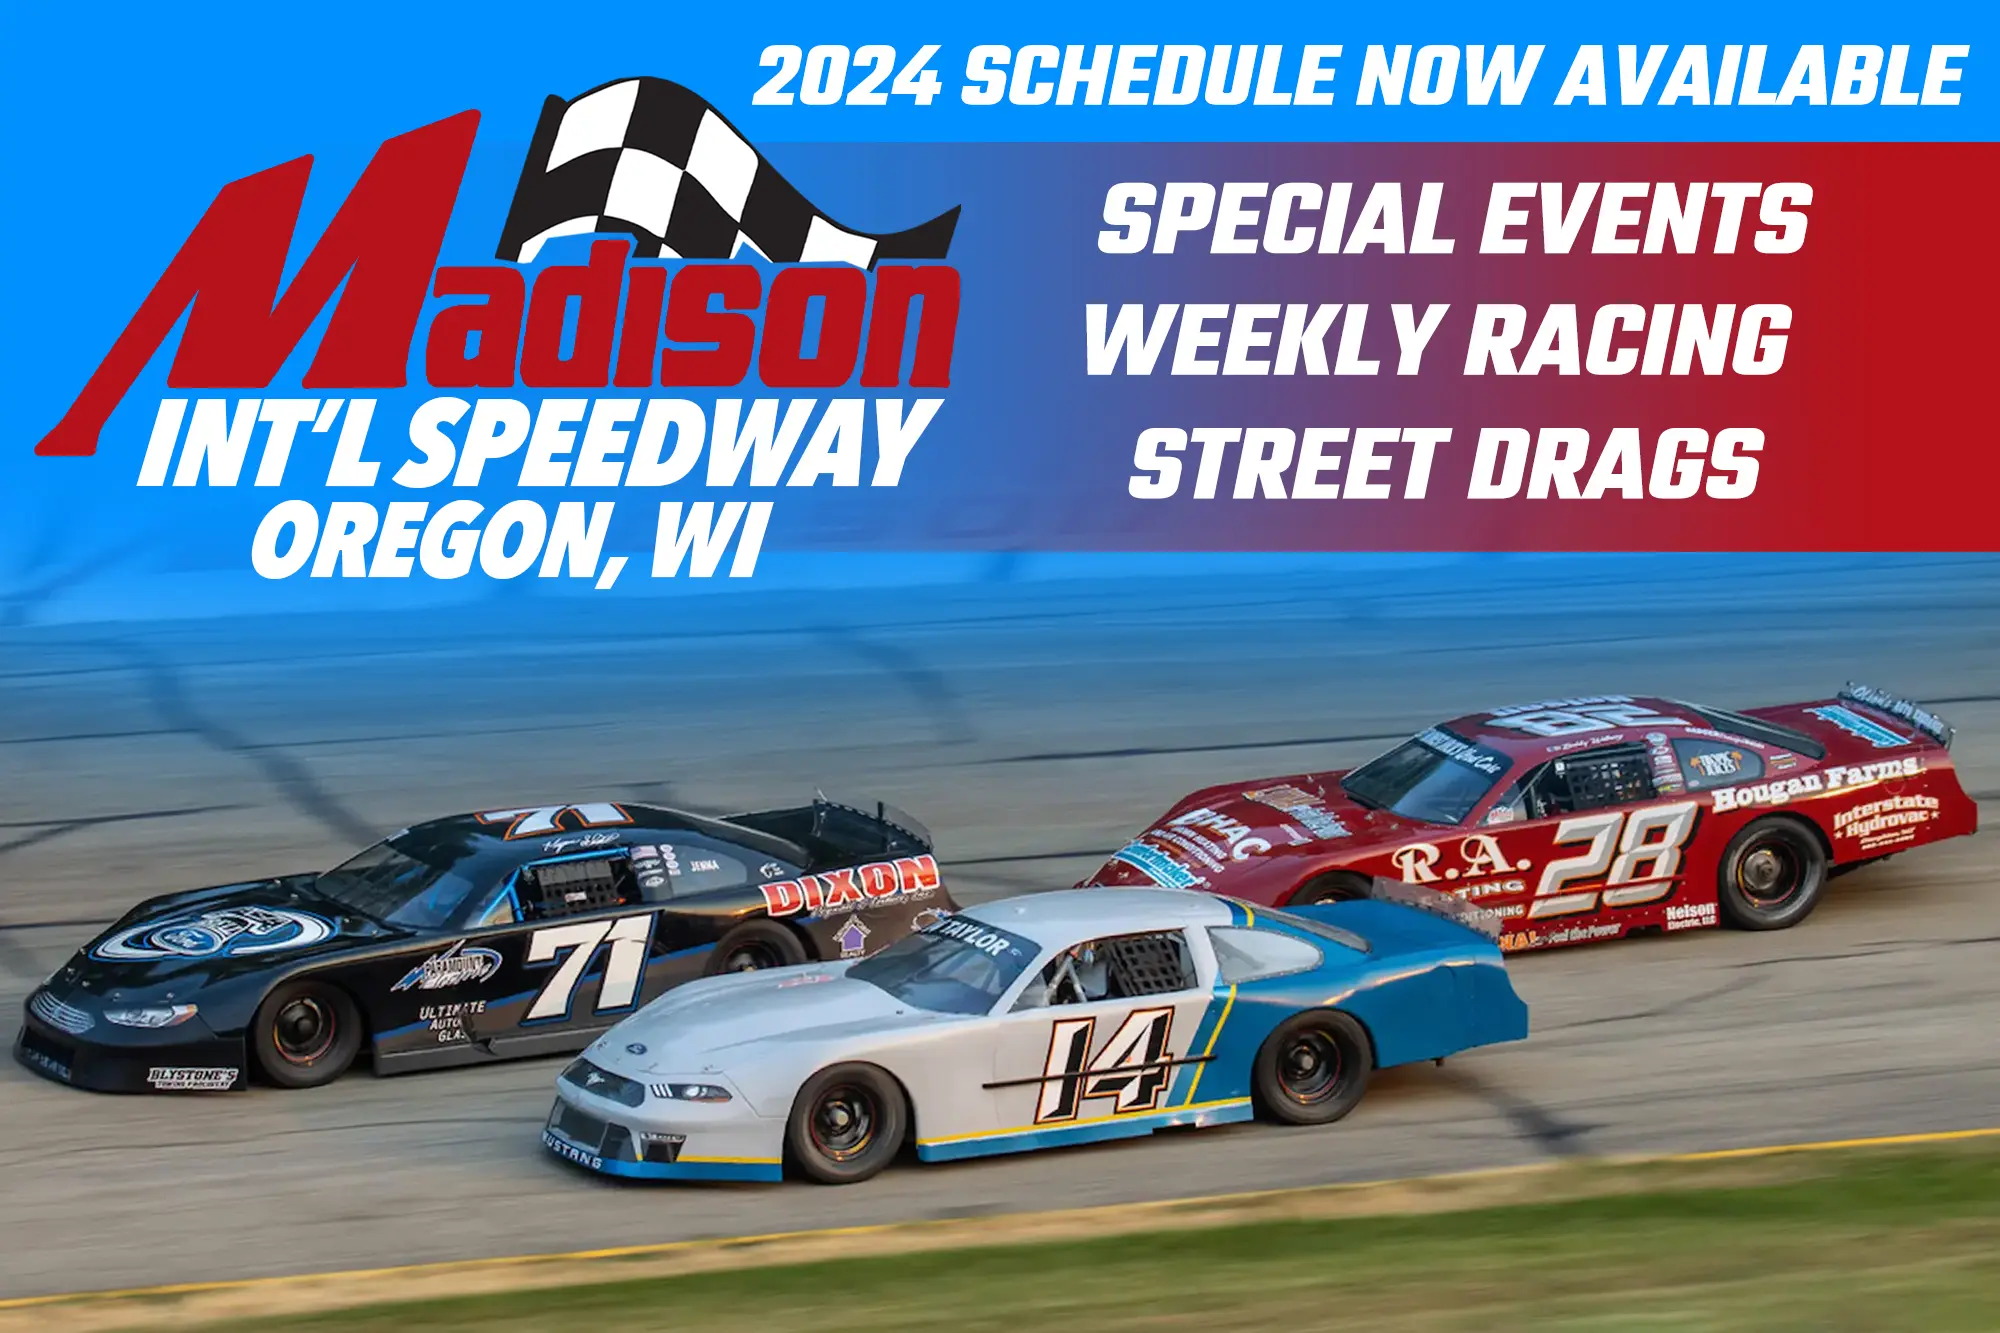 Featured image for “Weekly Racing and Street Drags with a Mega Mix of Specials Ready for 2024 at Madison International Speedway”